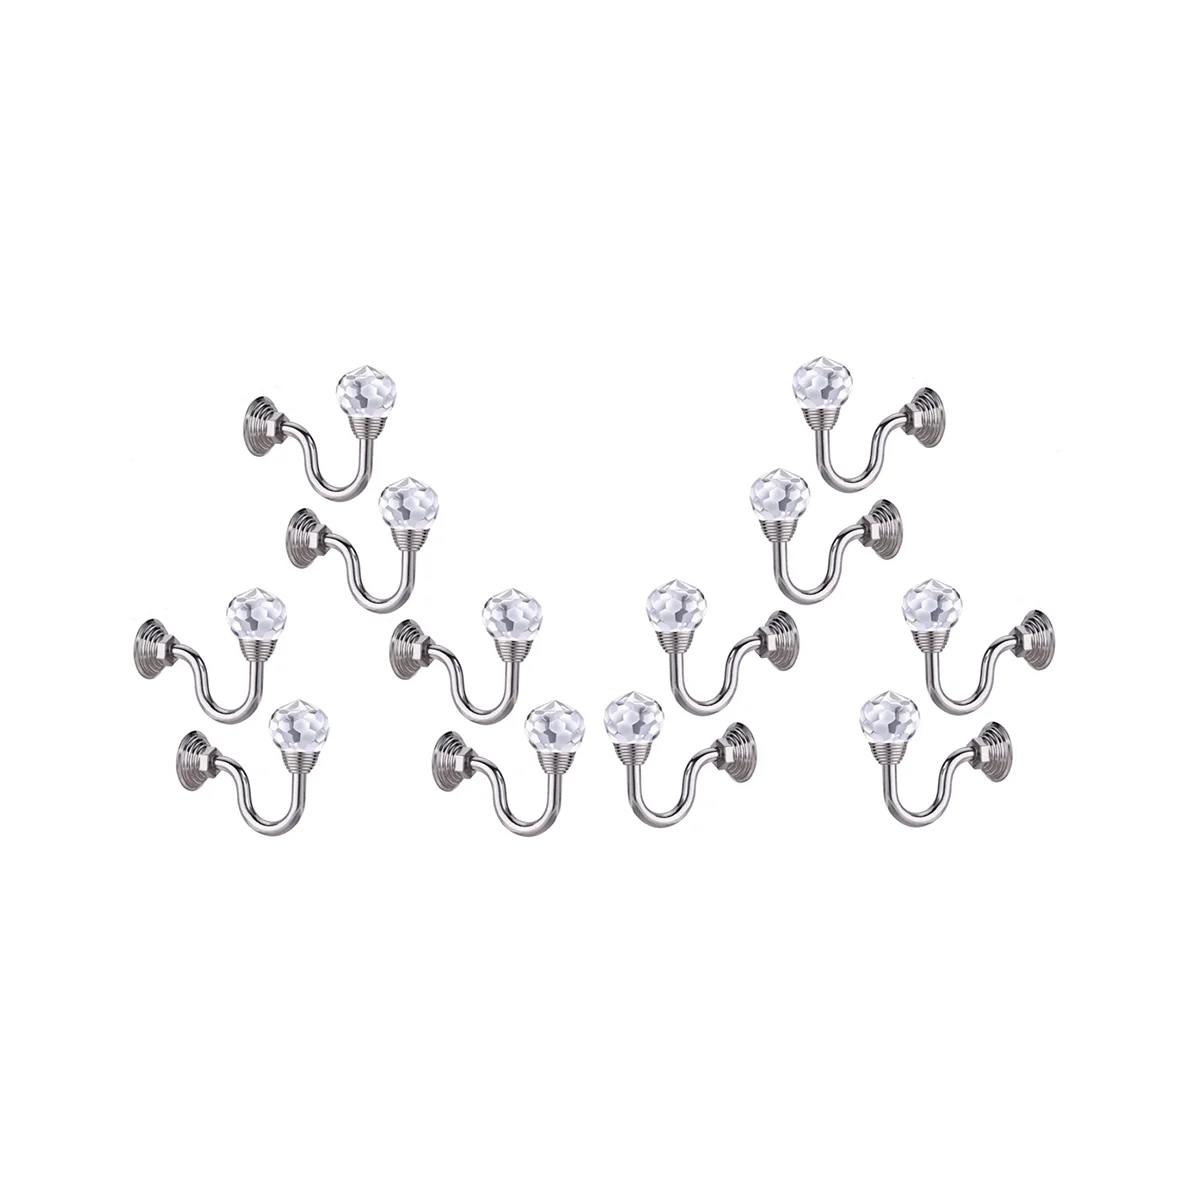 

12Pcs Retro Crystal Glass Curtain Holdback Wall Tie Back Hanger Holder Drawer Handle Curtain Accessories Hanger